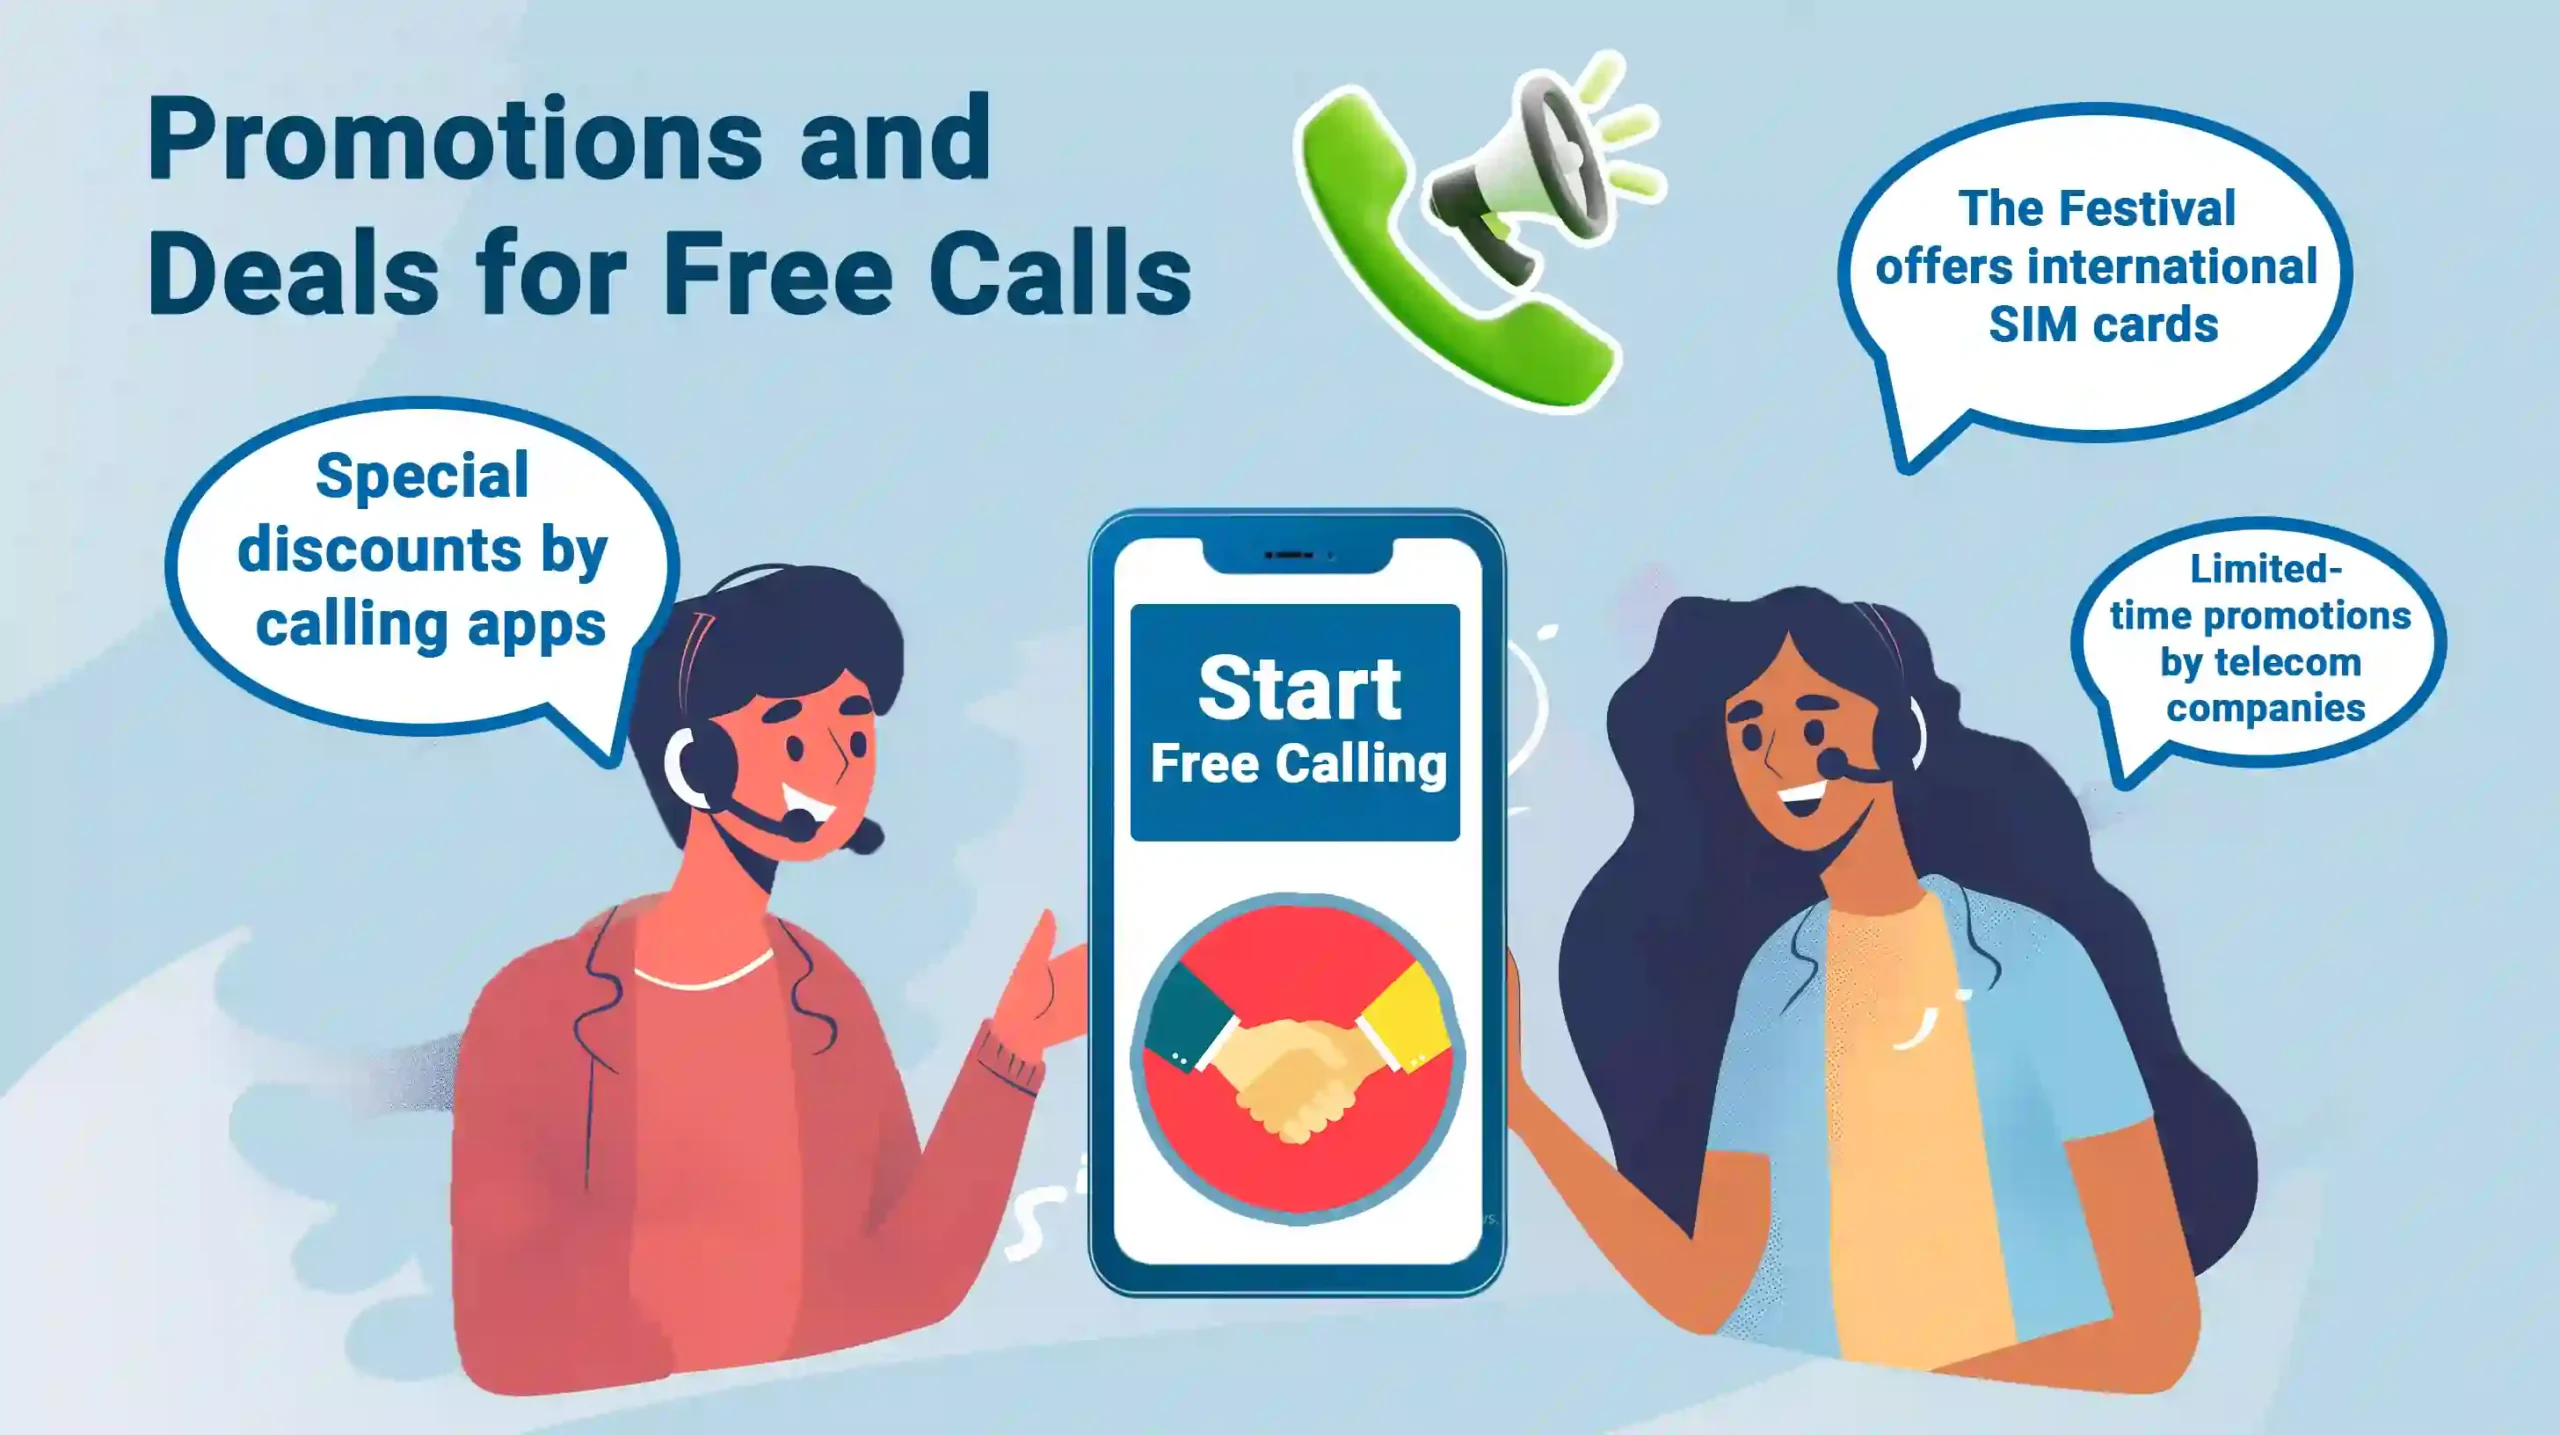 Promotions and Deals for Free Calls